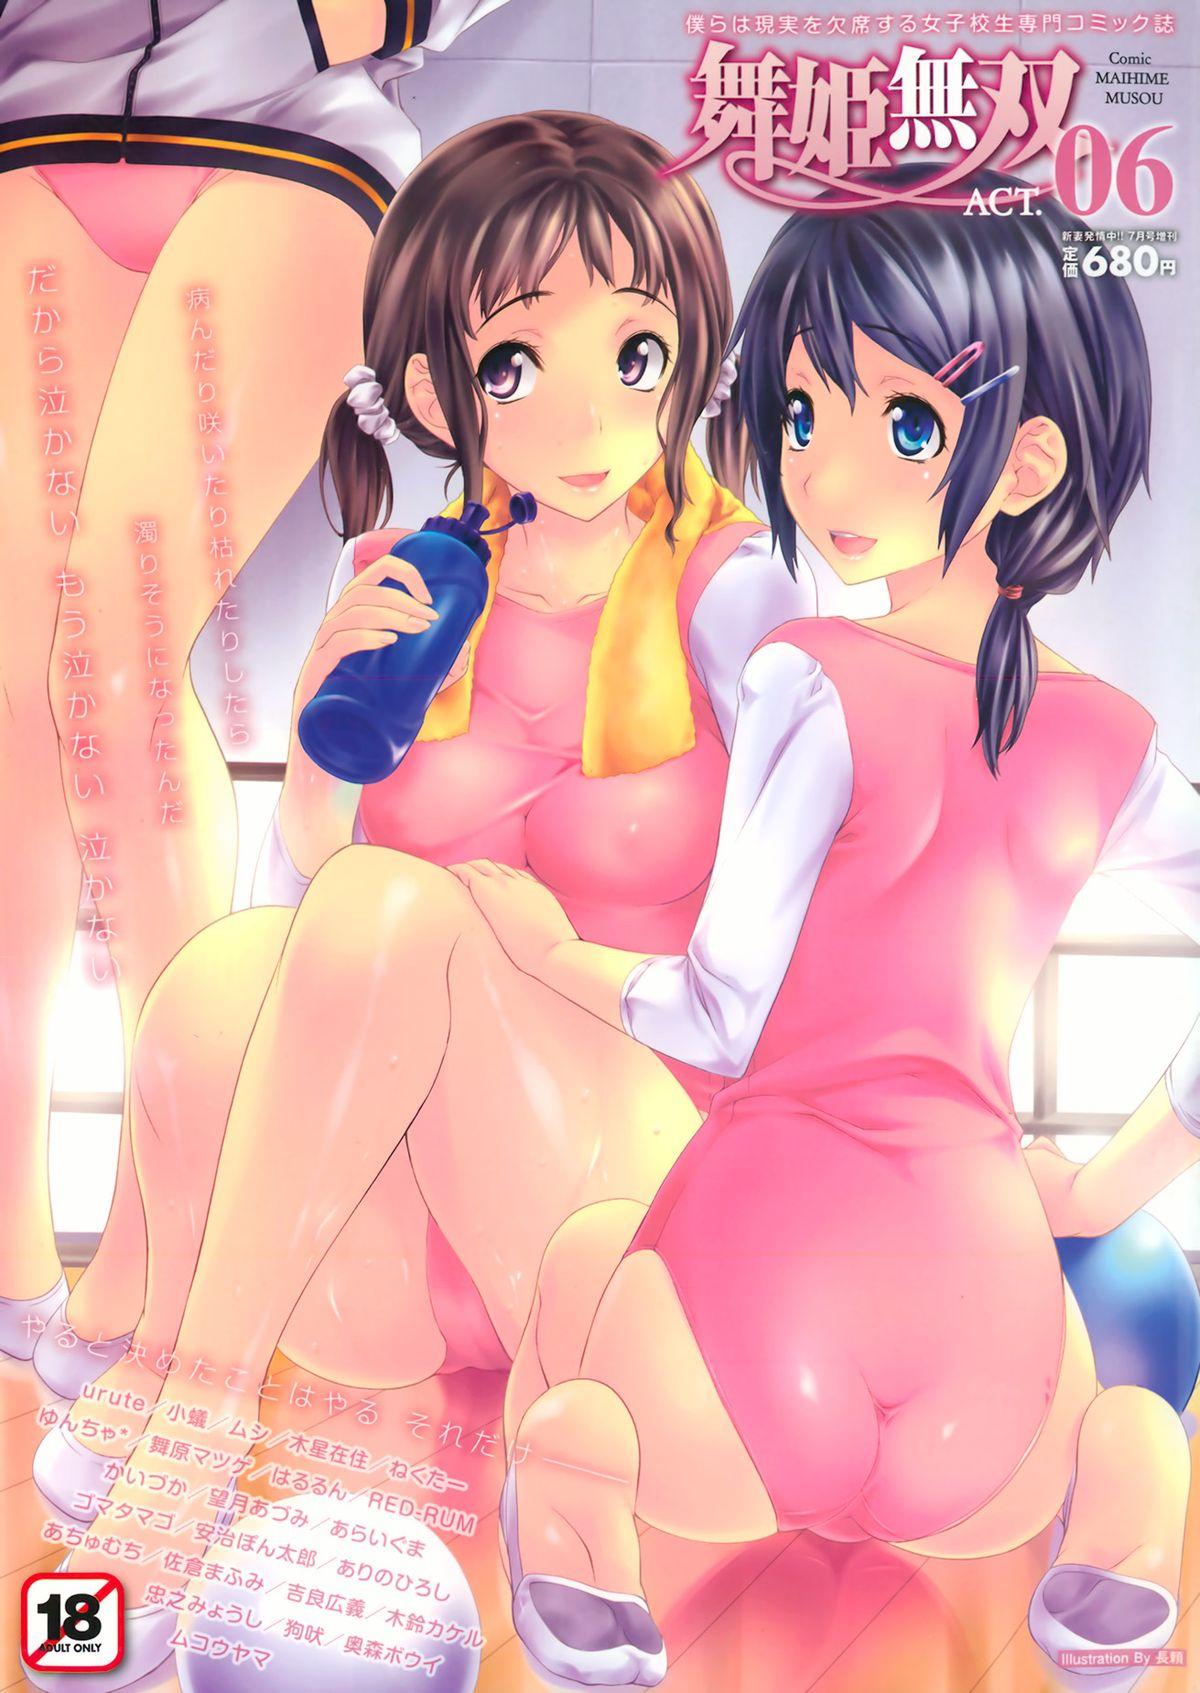 Hot Girl COMIC Maihime Musou Act. 06 2013-07 Pay - Page 1